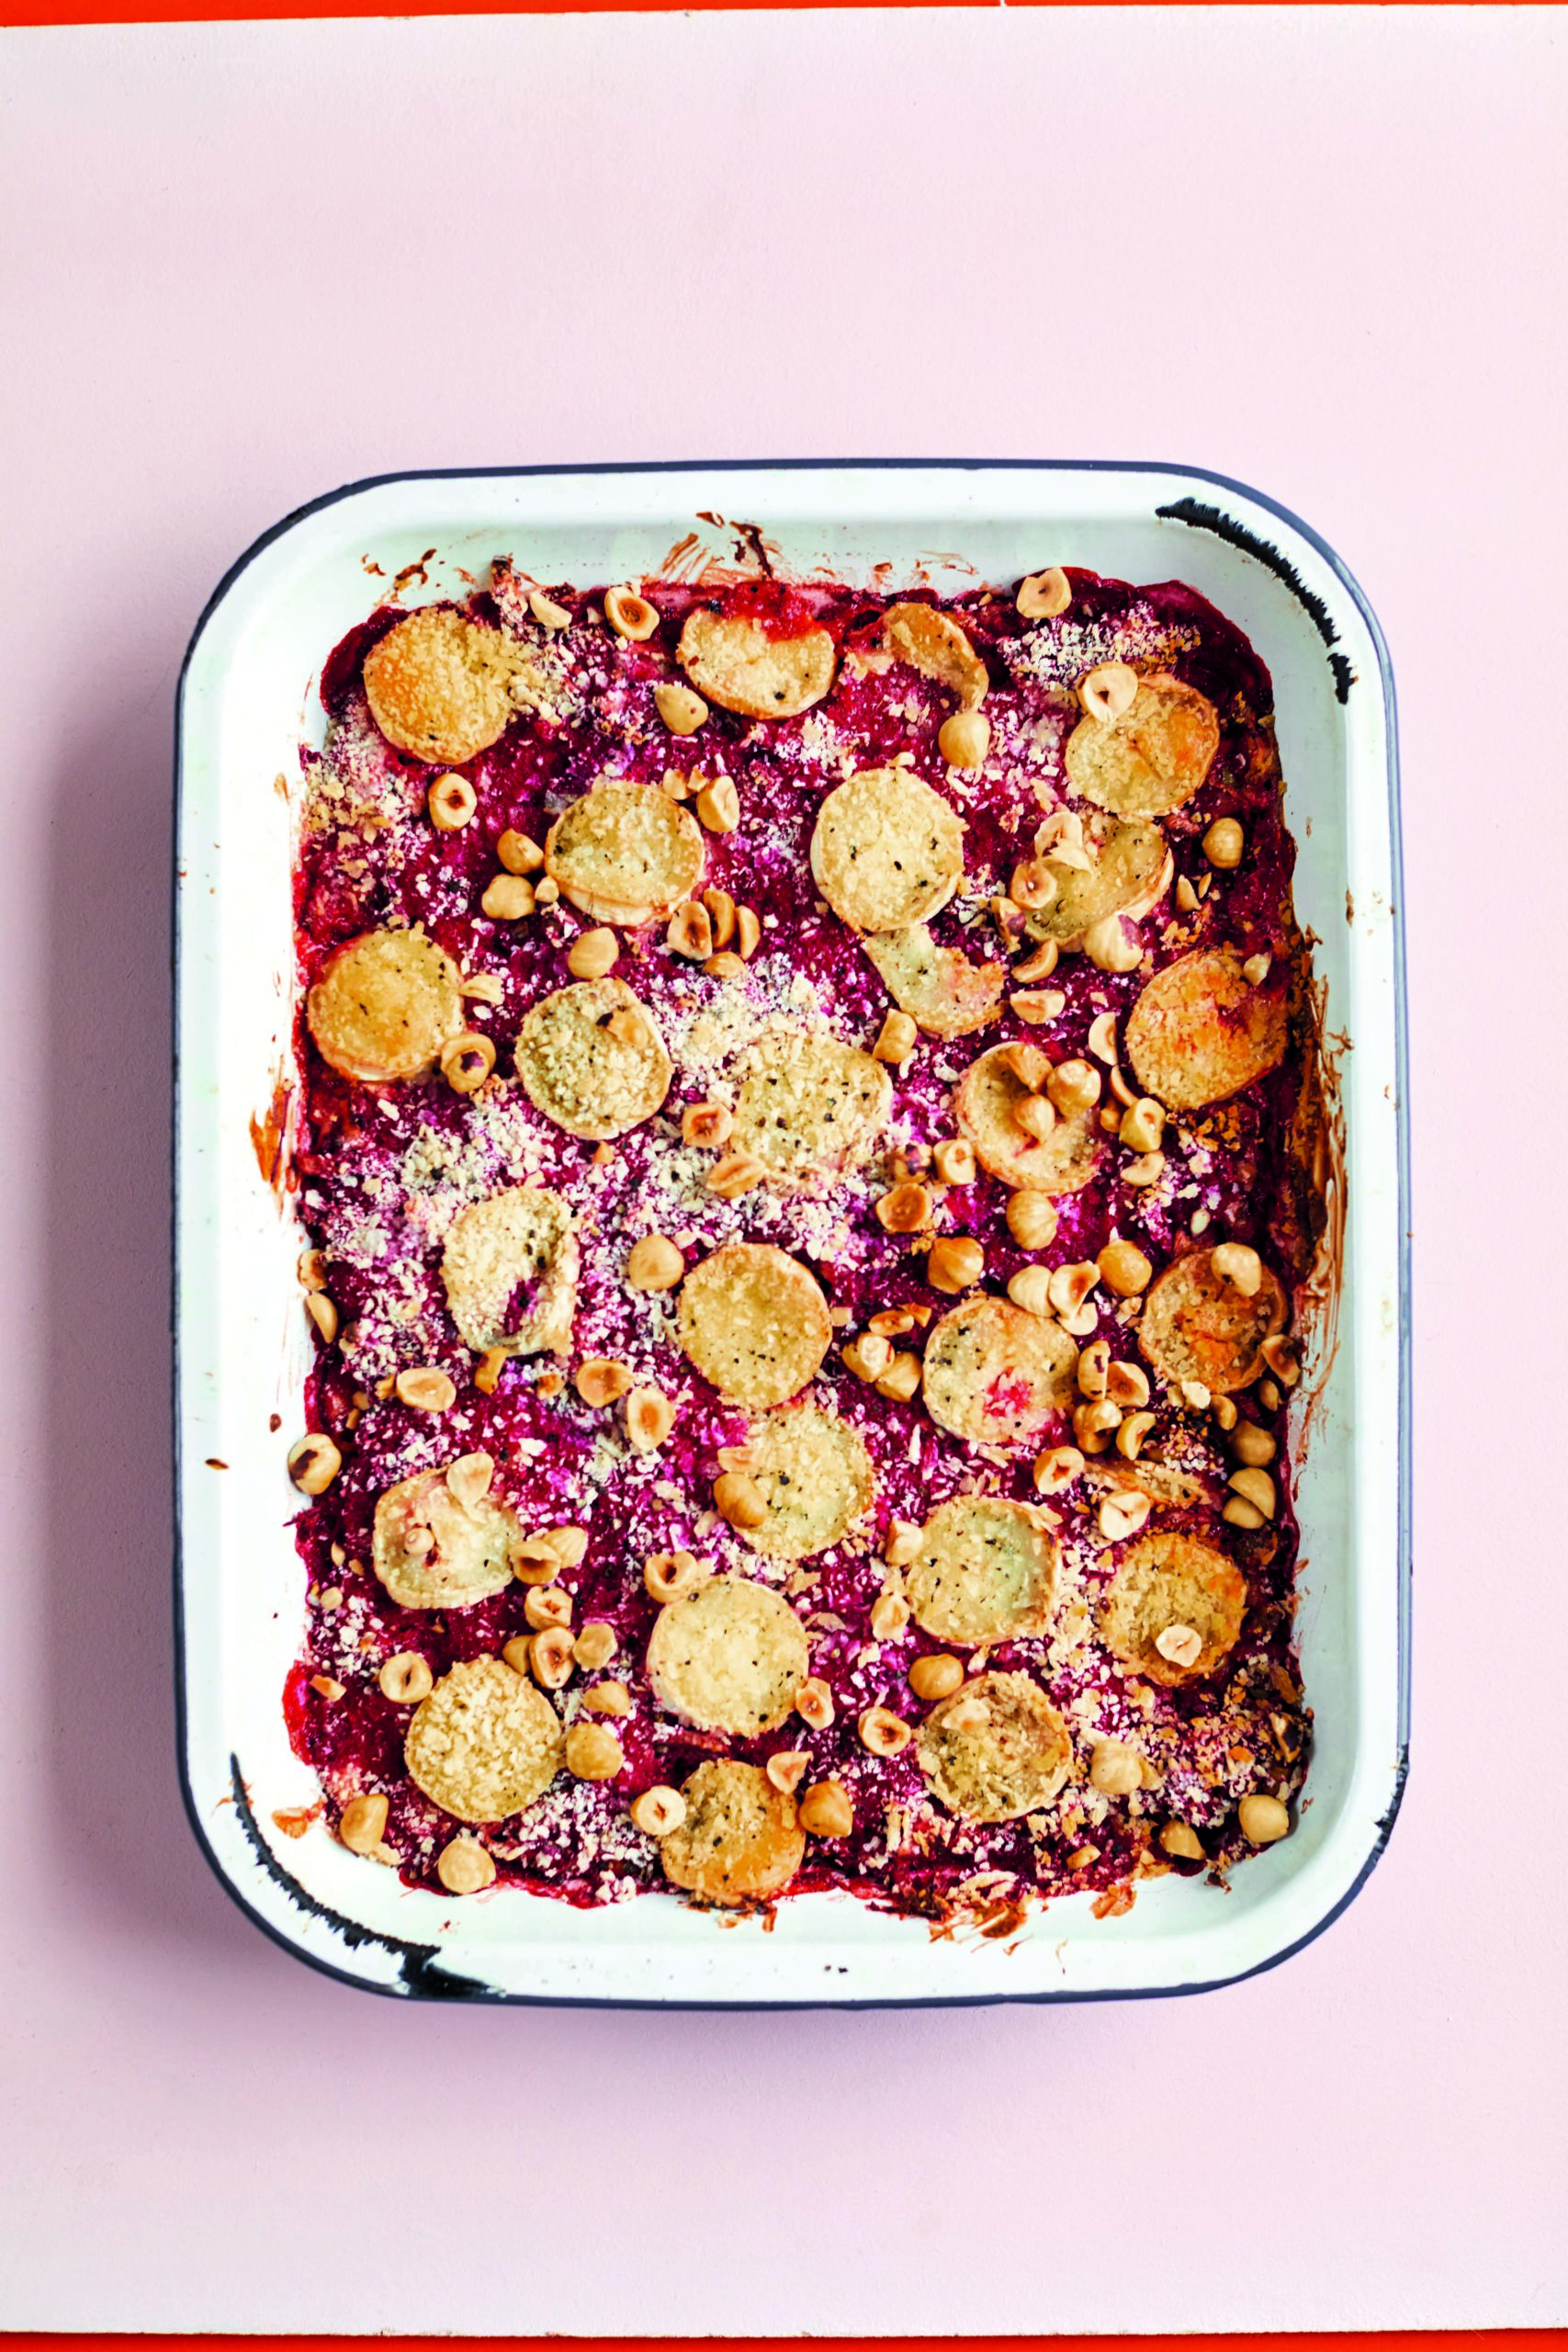 Beetroot and Leek Gratin With Goat’s Cheese and Hazelnuts